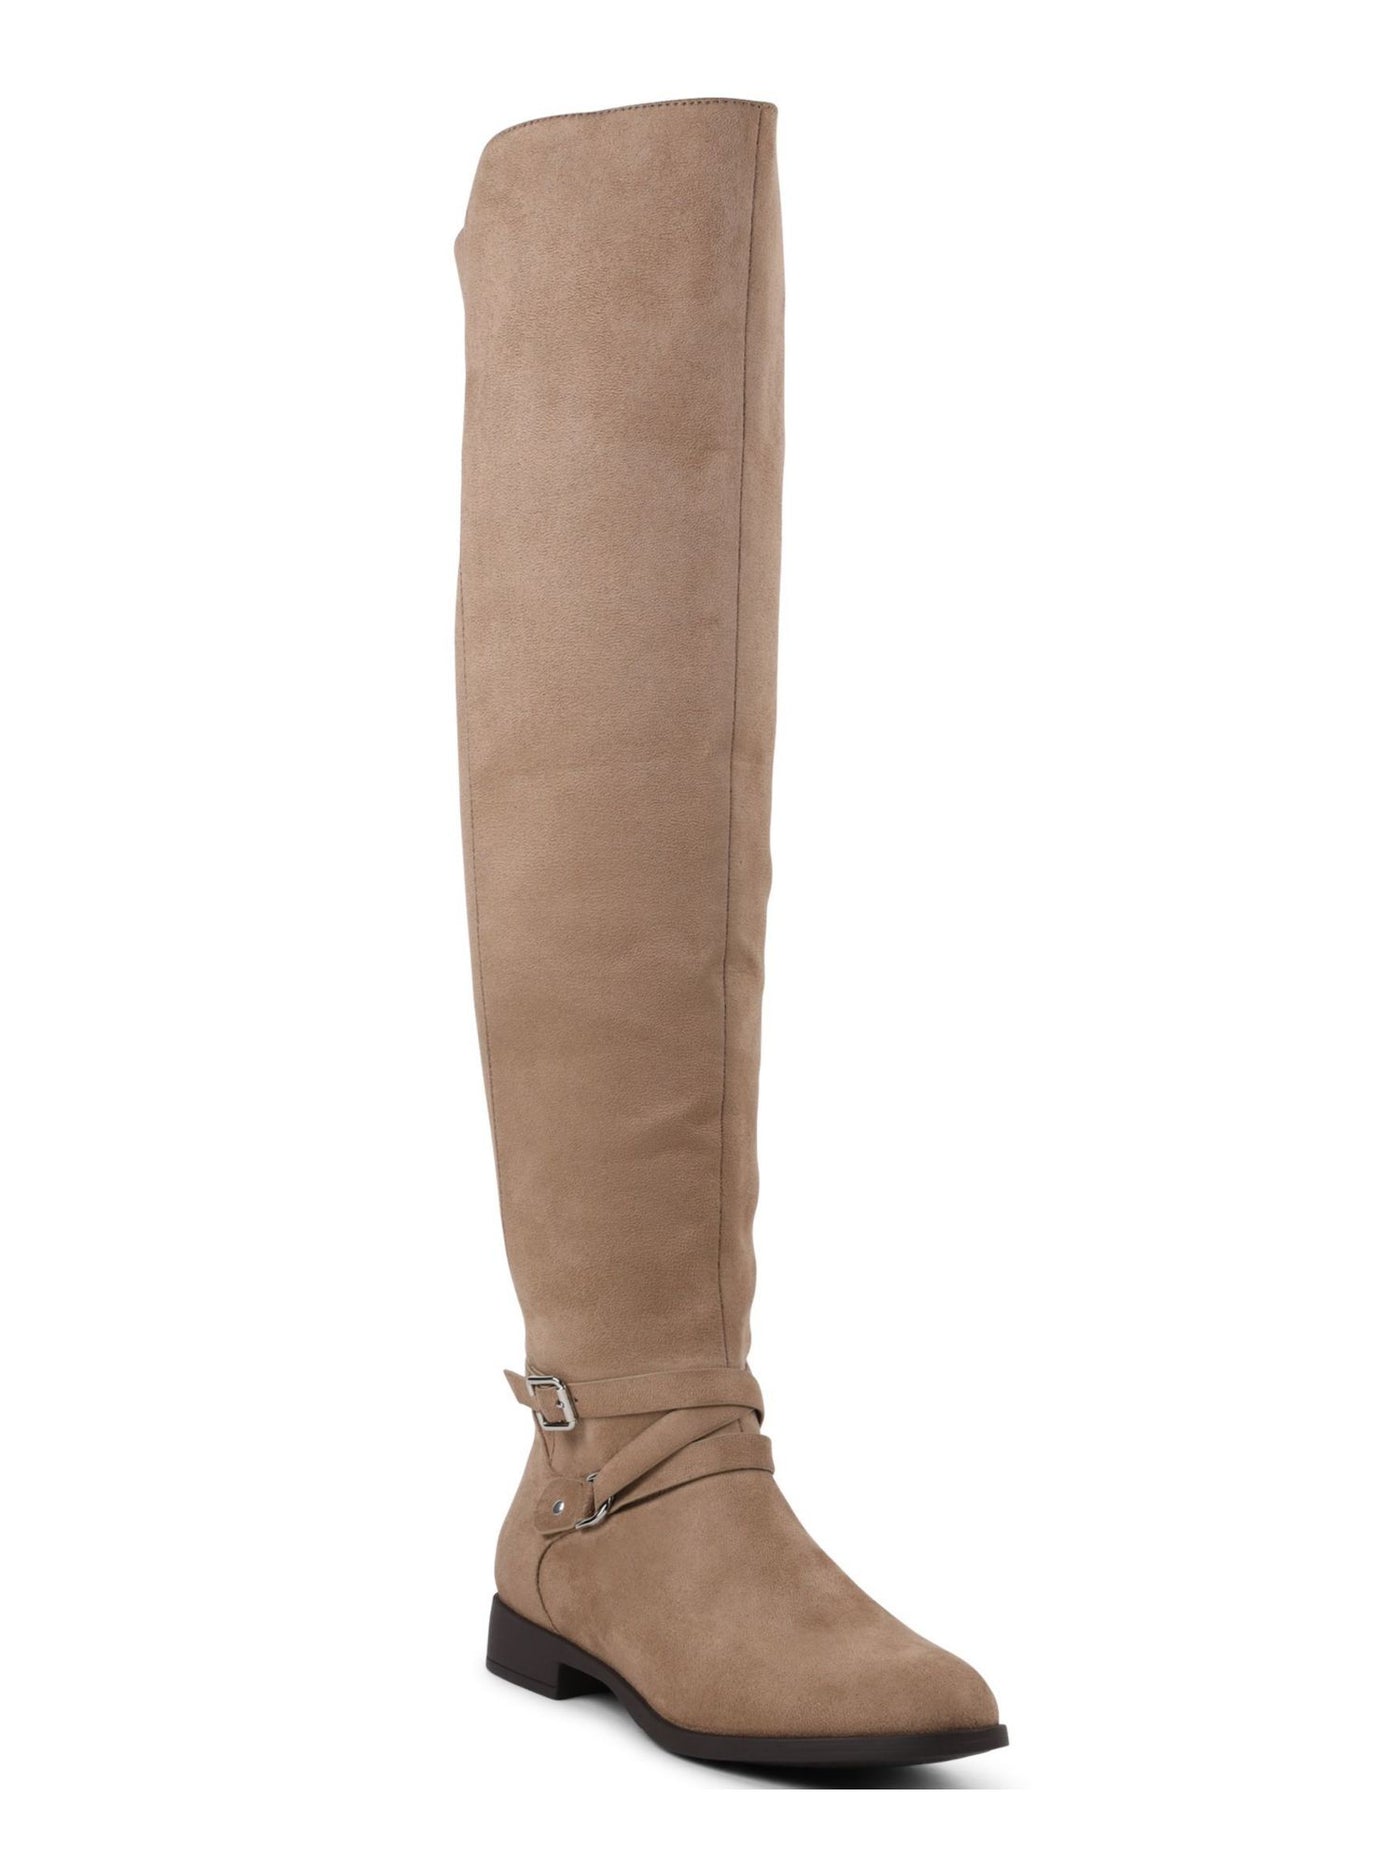 XOXO Womens Beige Buckle Accent Almond Toe Stacked Heel Zip-Up Dress Boots Shoes 6.5